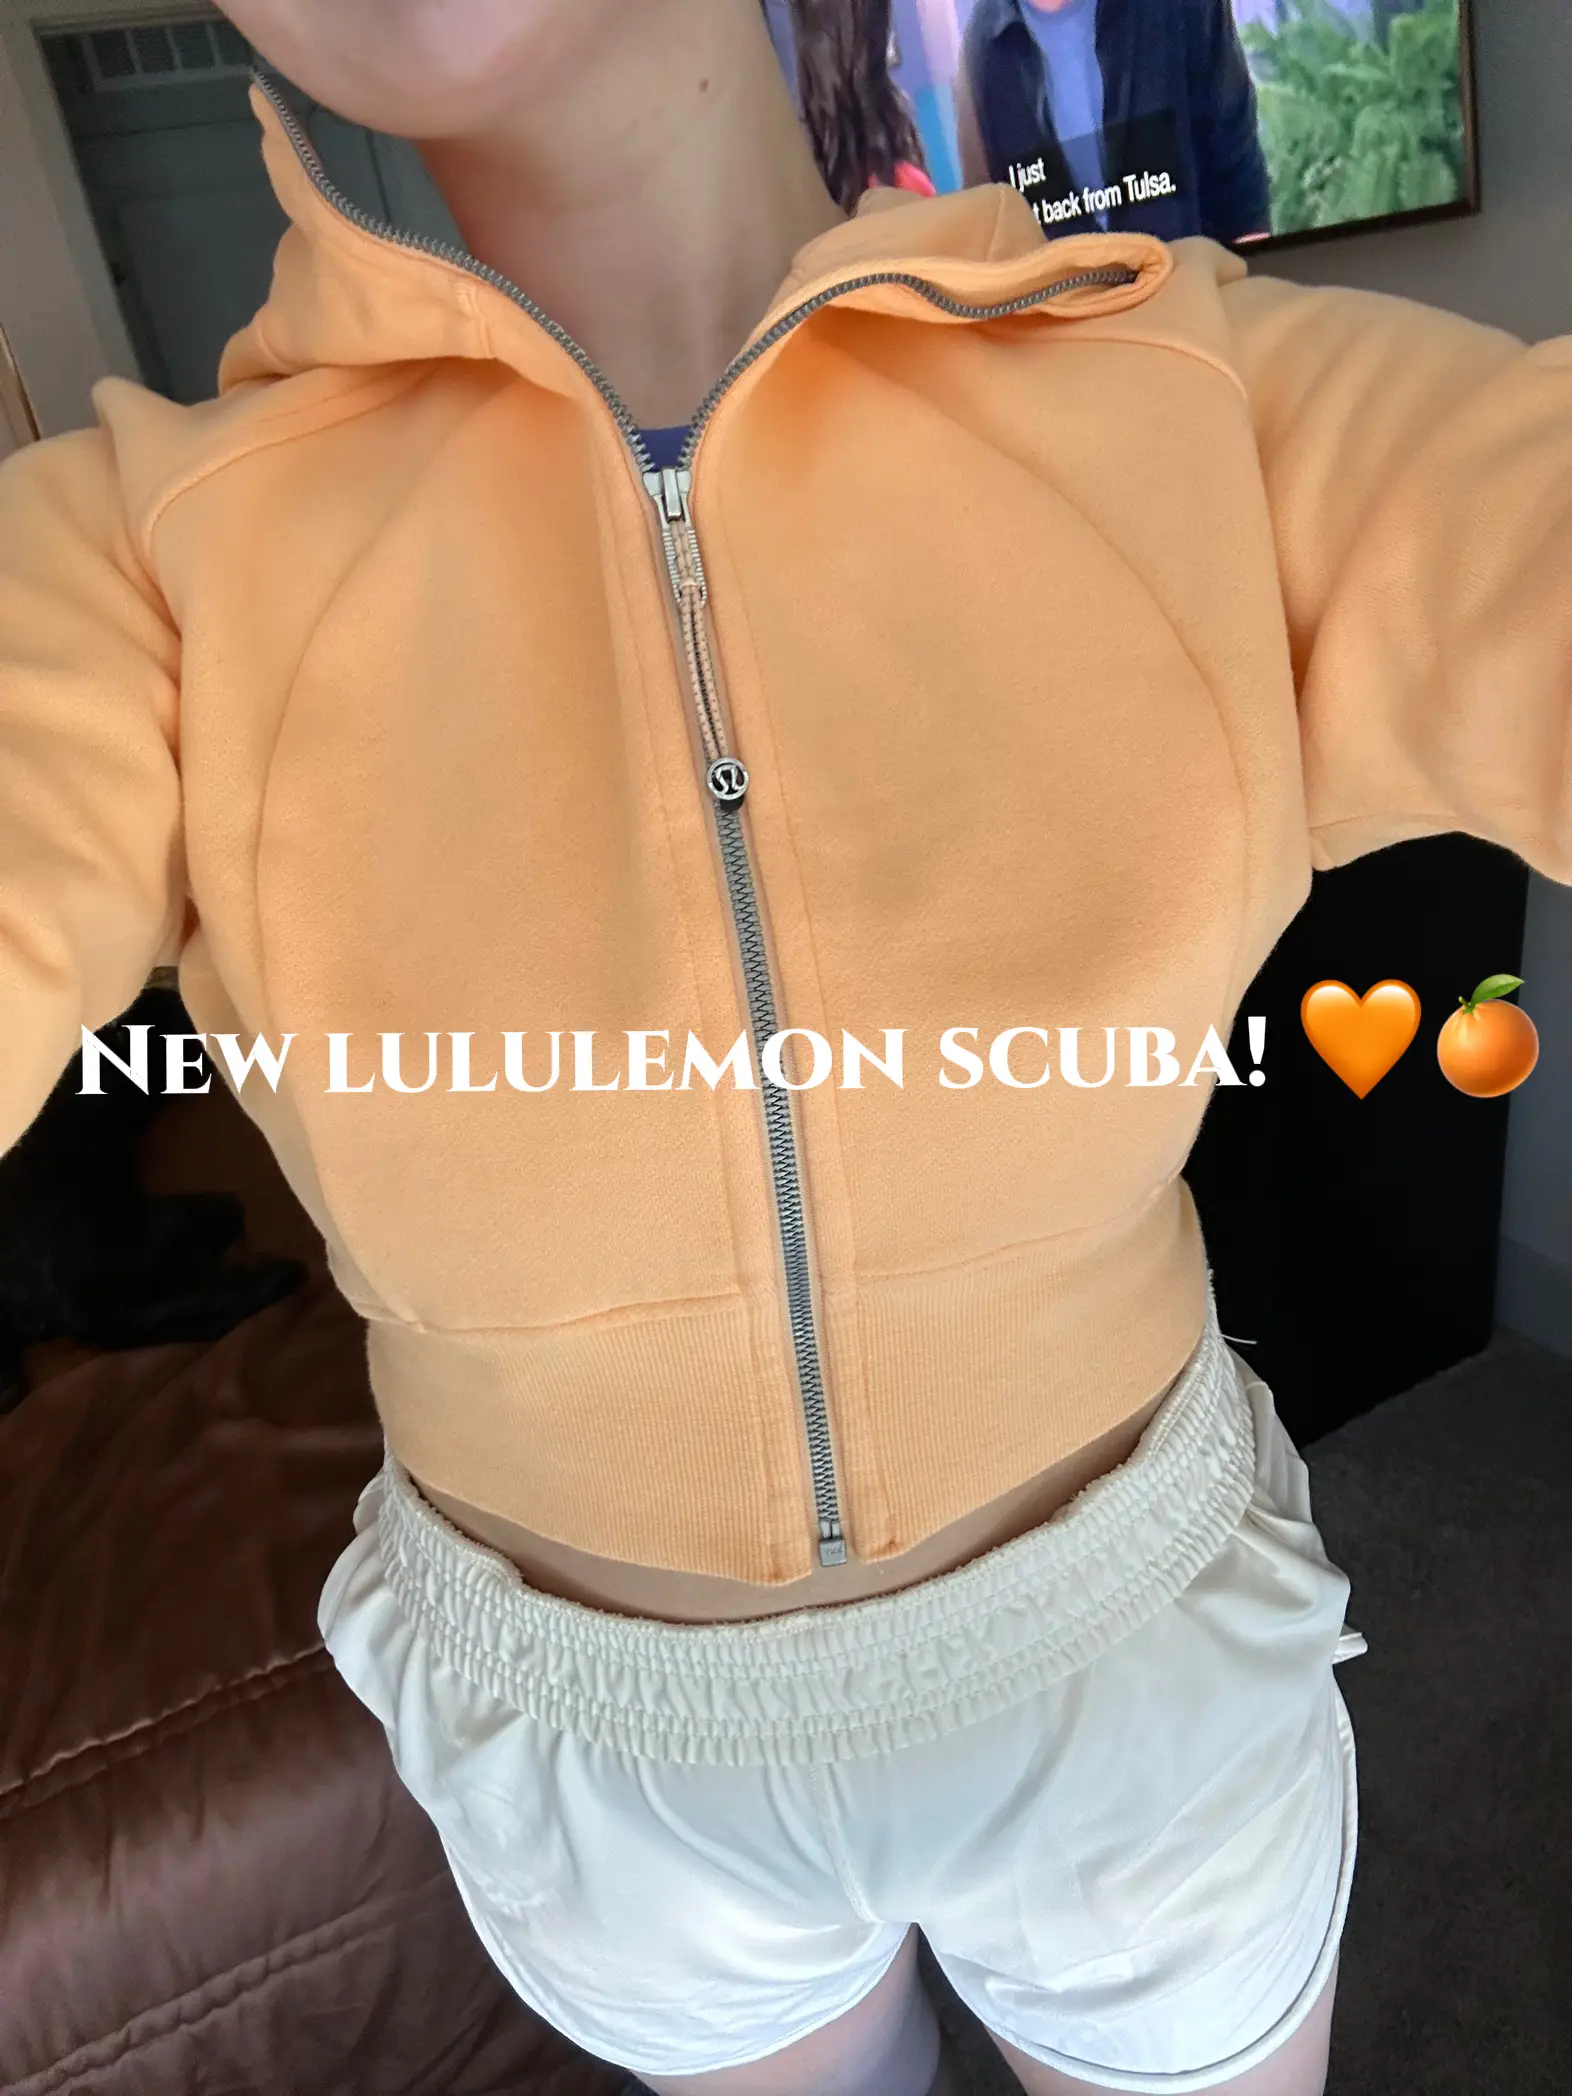 absolutely obsessed w this color🤩 #lululemon #lululemonscuba